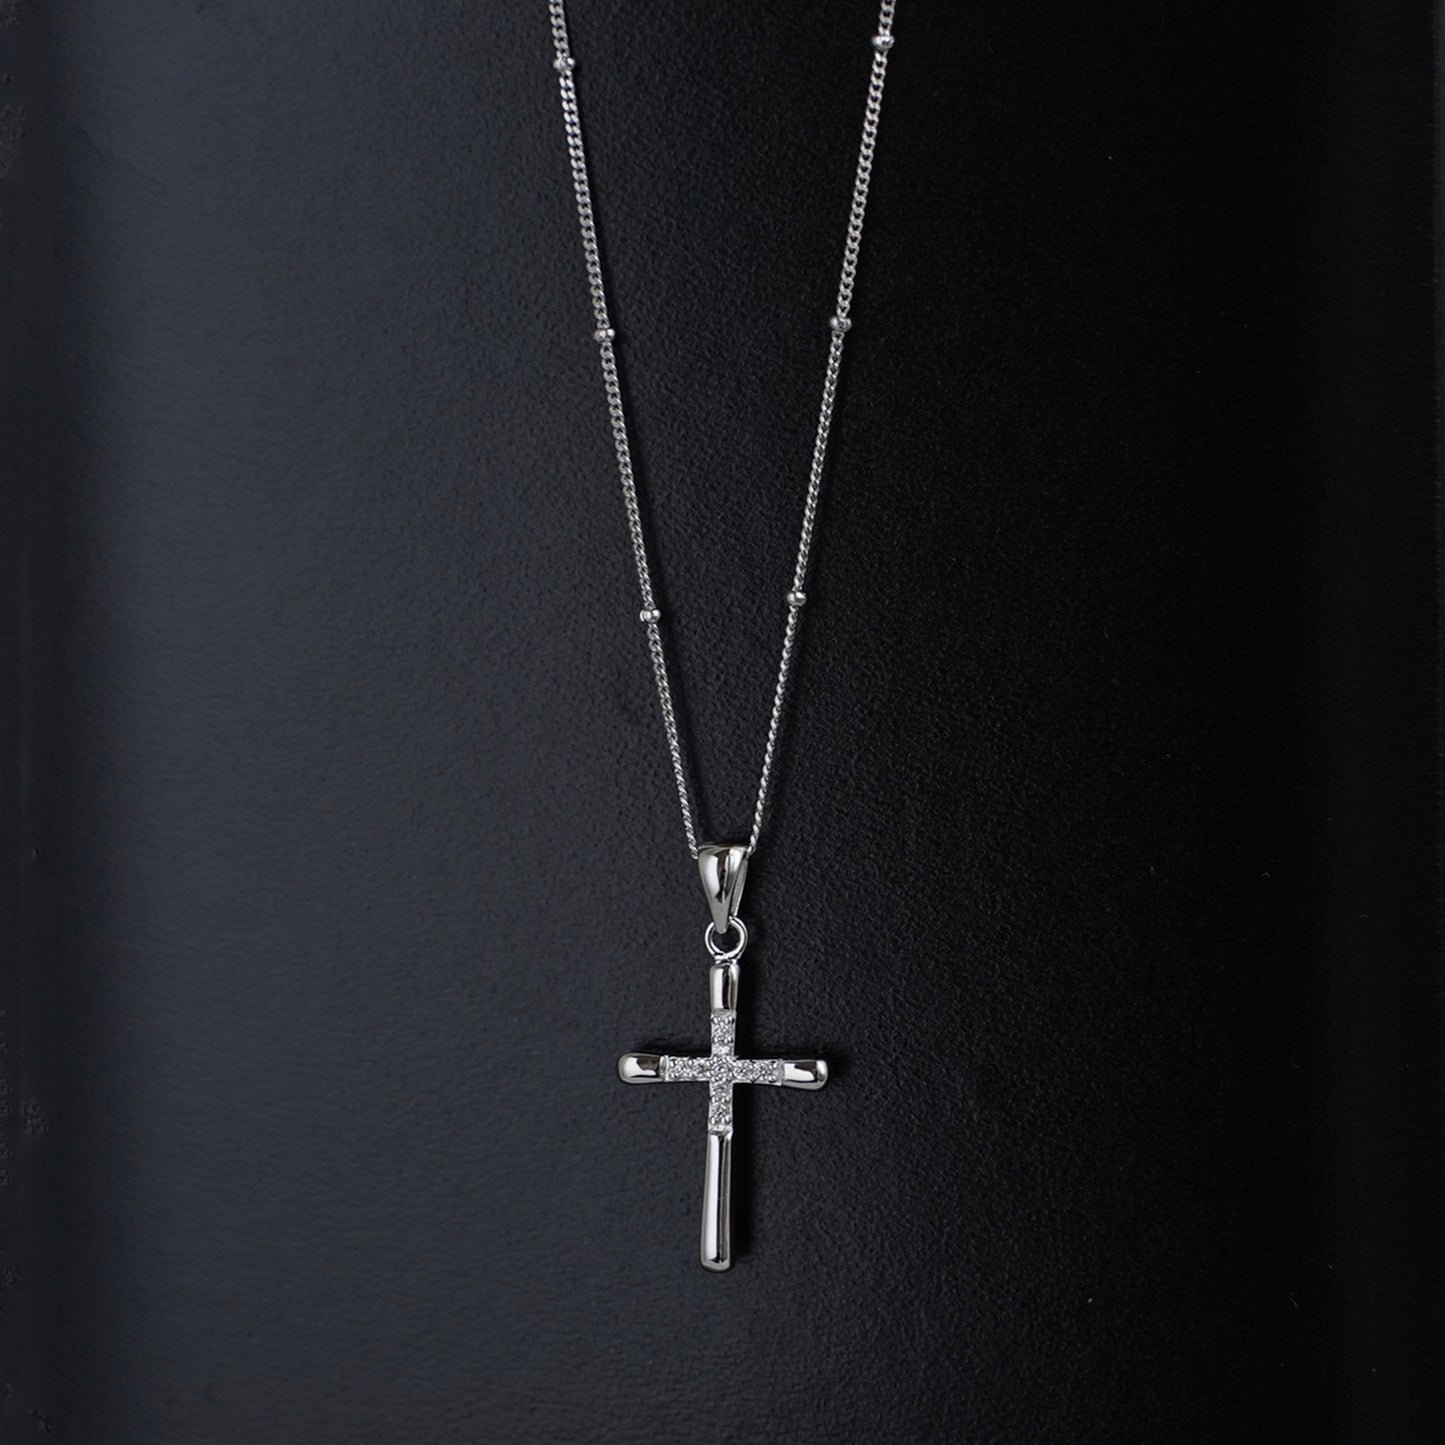 Sterling Silver CZ Crusted Cross Pendant Necklace with Chain - sugarkittenlondon